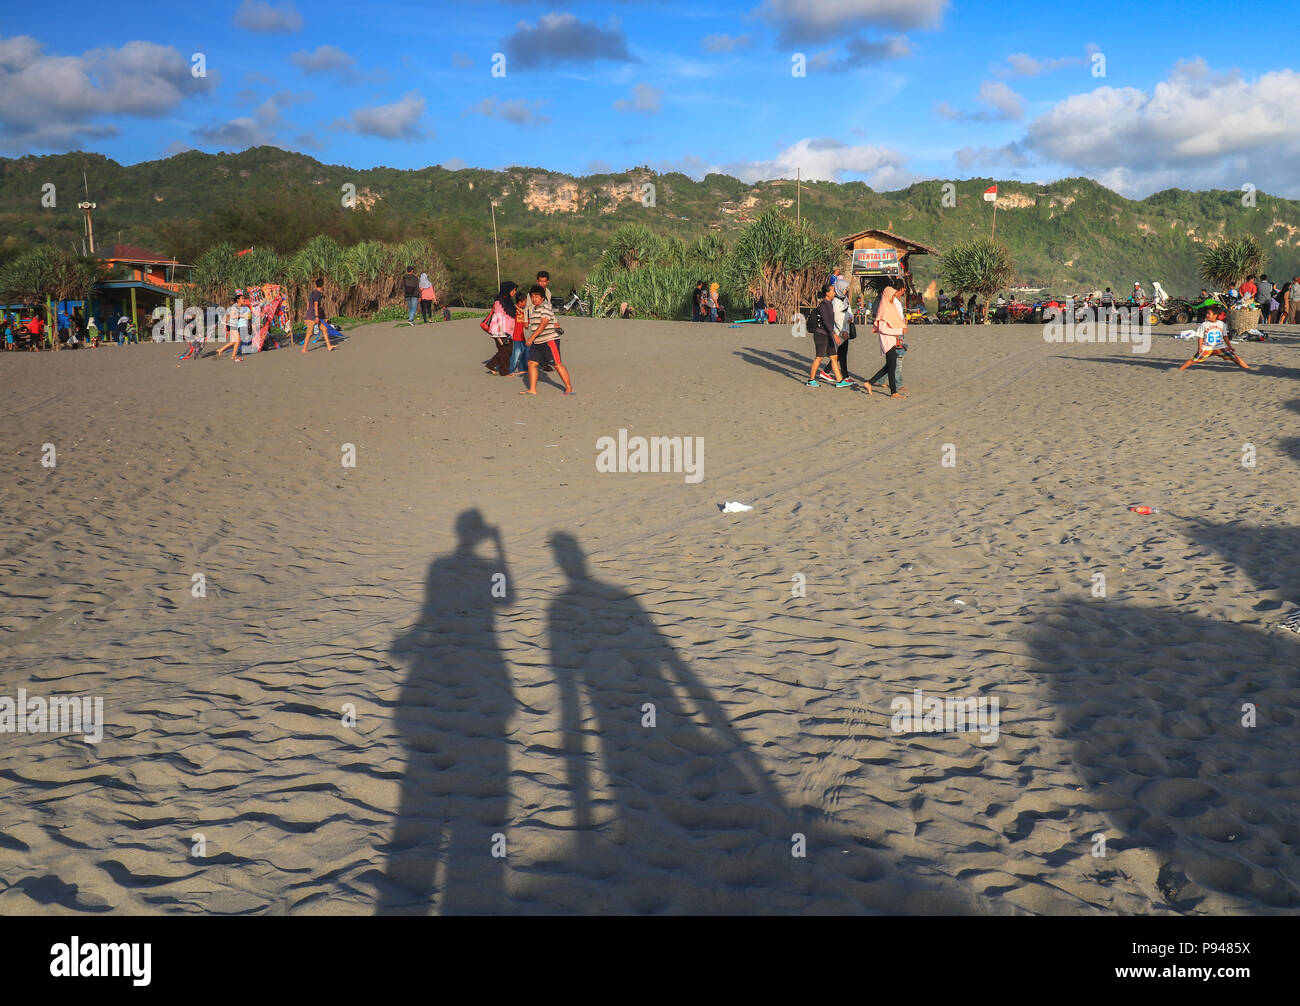 Parangtritis beach is the best tourist place in yogyakarta for enjoying the sunset while having fun. Stock Photo